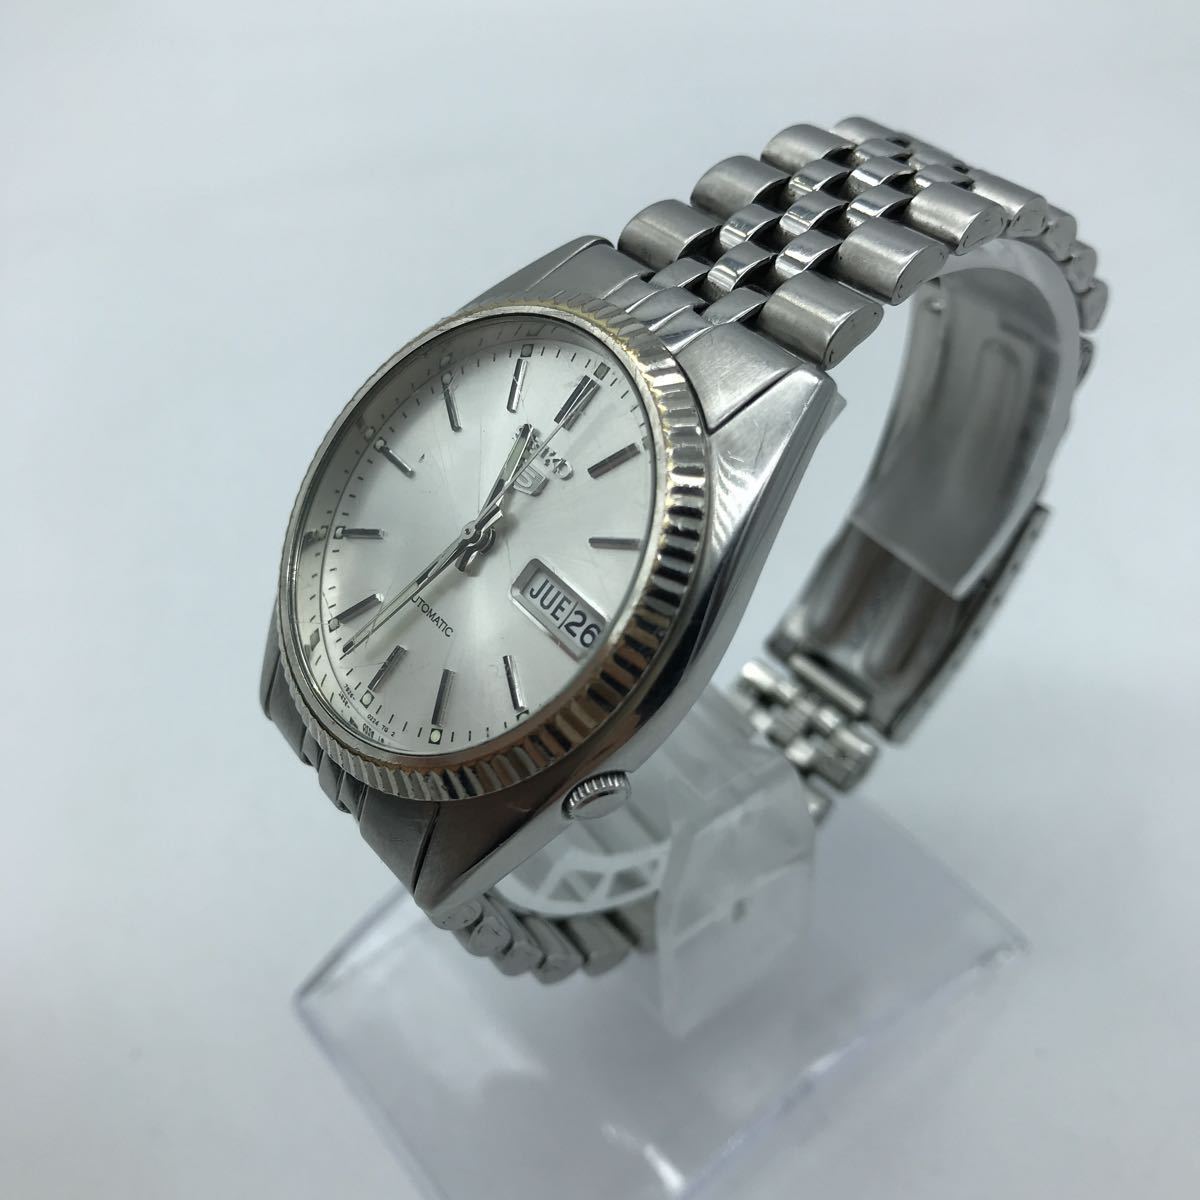 SEIKO 5 セイコーファイブ 7S26-0500 裏スケ 自動巻 腕時計 AT ホワイト文字盤 シルバー 動作品 product details  | Proxy bidding and ordering service for auctions and shopping within Japan  and the United States - Get the